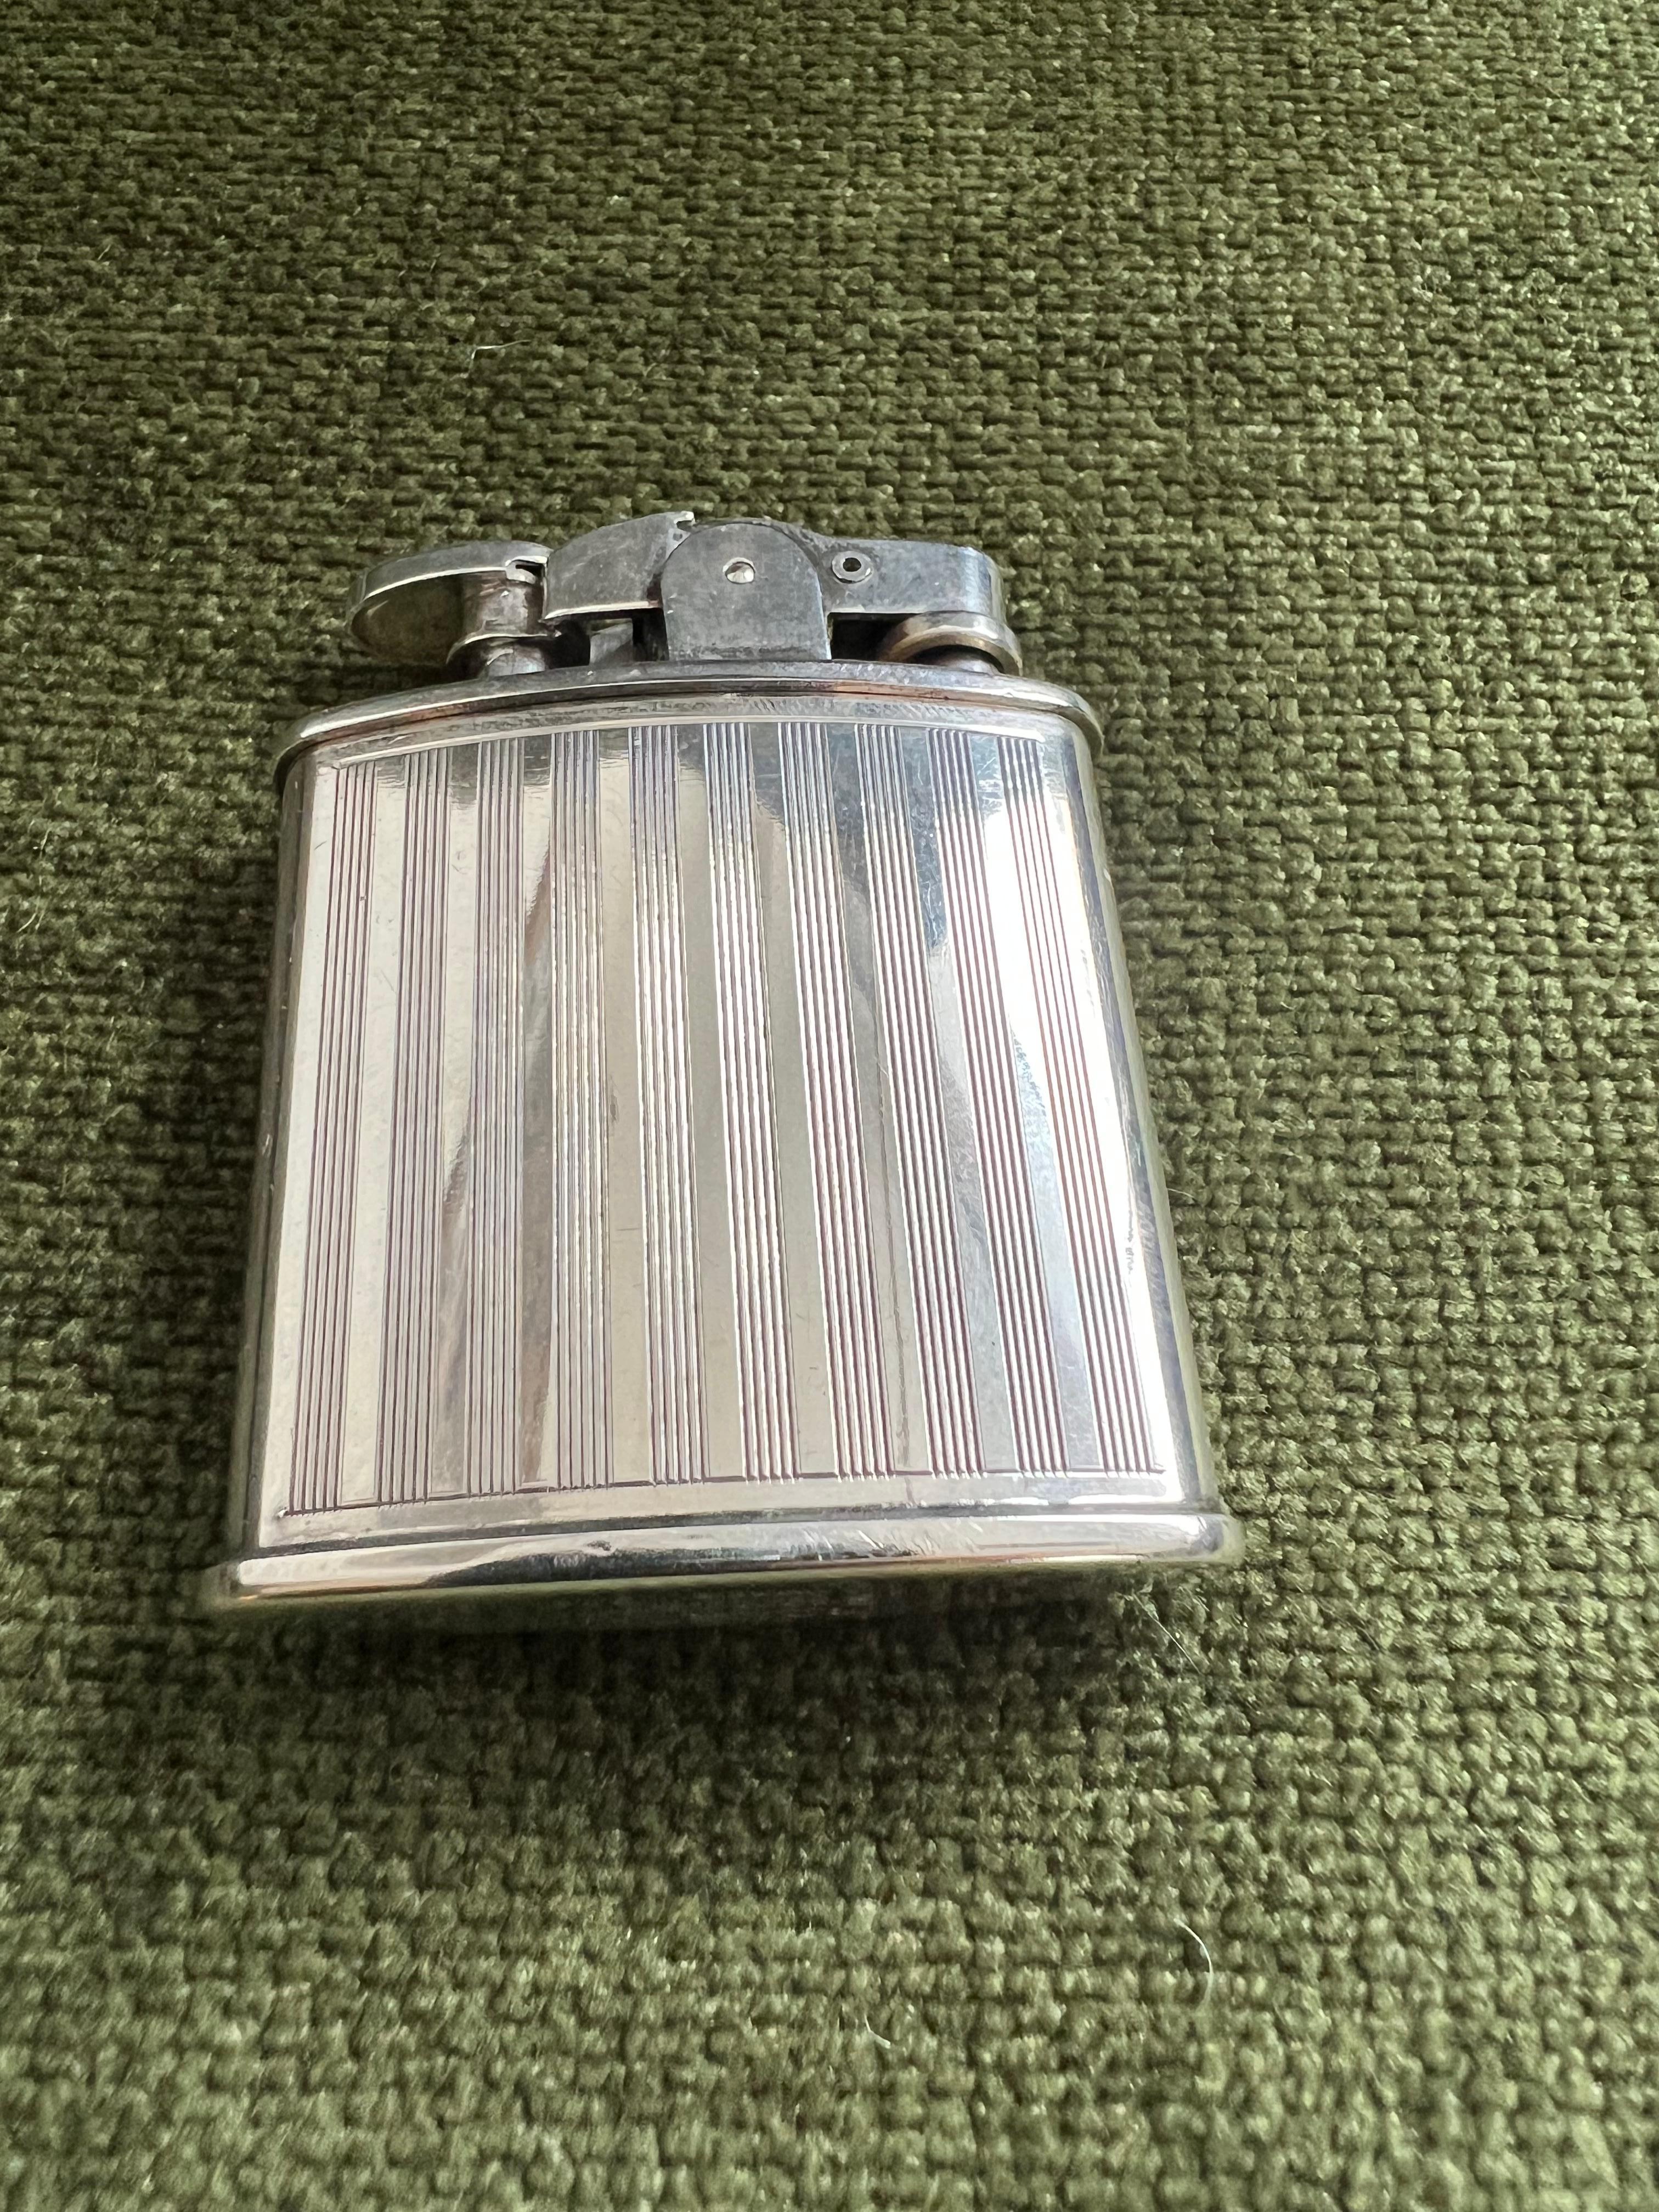 Ronson “1943” Limited Edition 100 Year Anniversary Silver Plated Vintage Lighter 3